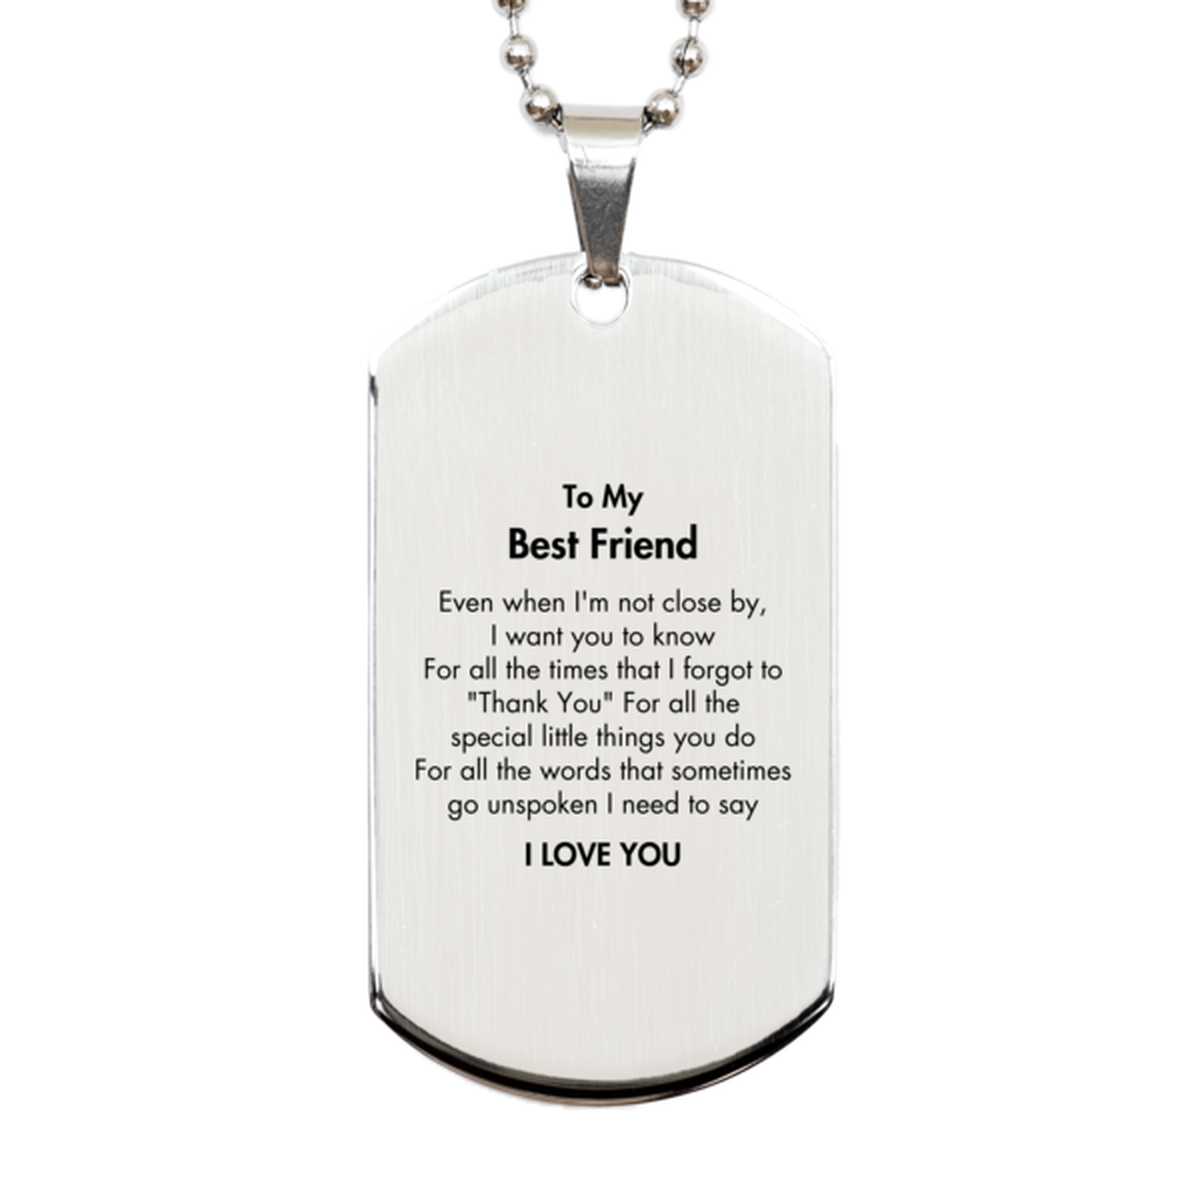 Thank You Gifts for Best Friend, Keepsake Silver Dog Tag Gifts for Best Friend Birthday Mother's day Father's Day Best Friend For all the words That sometimes go unspoken I need to say I LOVE YOU